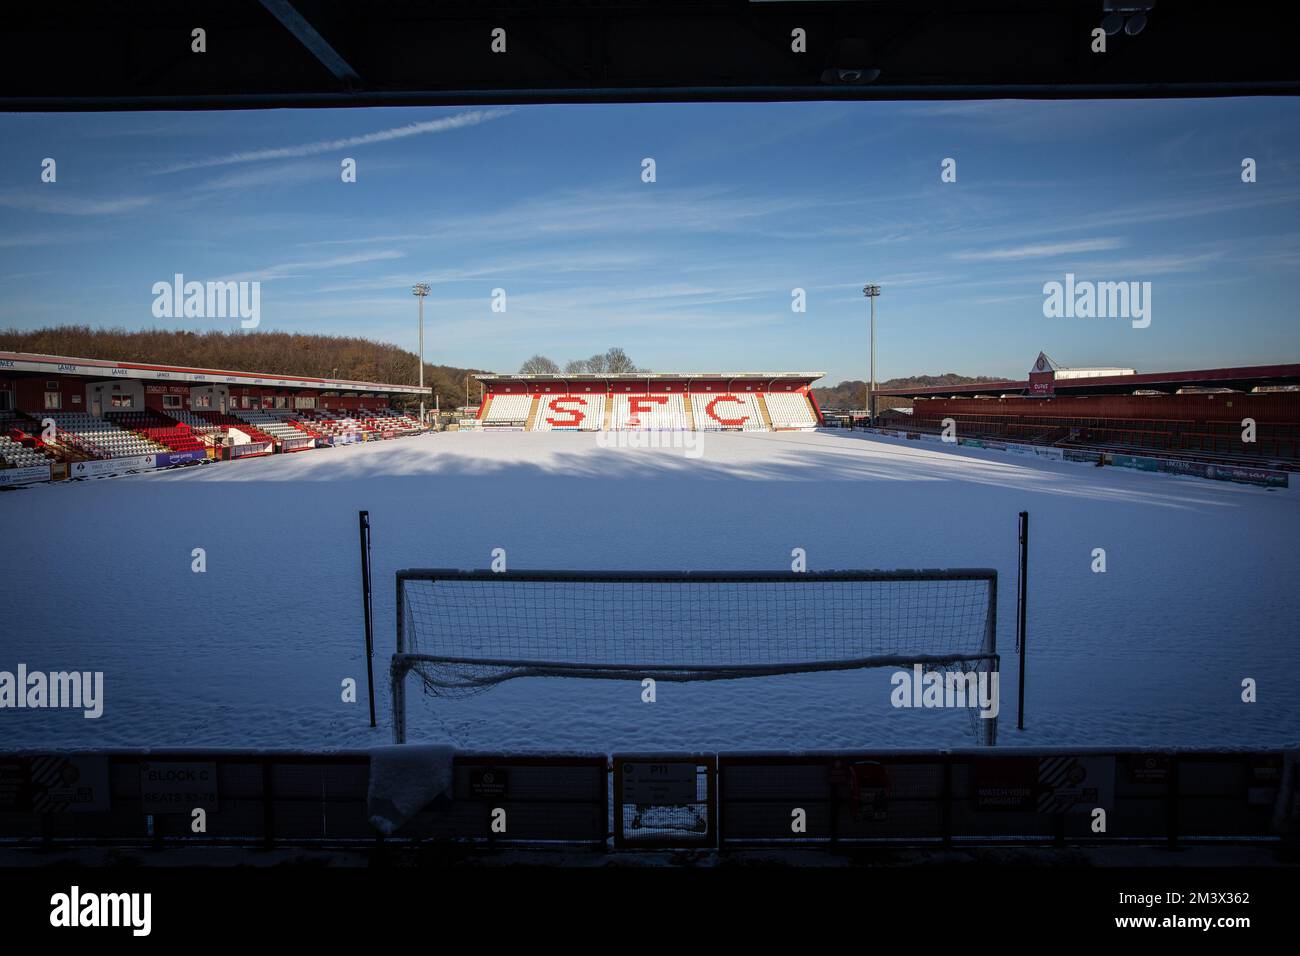 Snow covered football / soccer pitch in wintery scene at English football ground. Lamex Stadium, Stevenage FC, Stock Photo